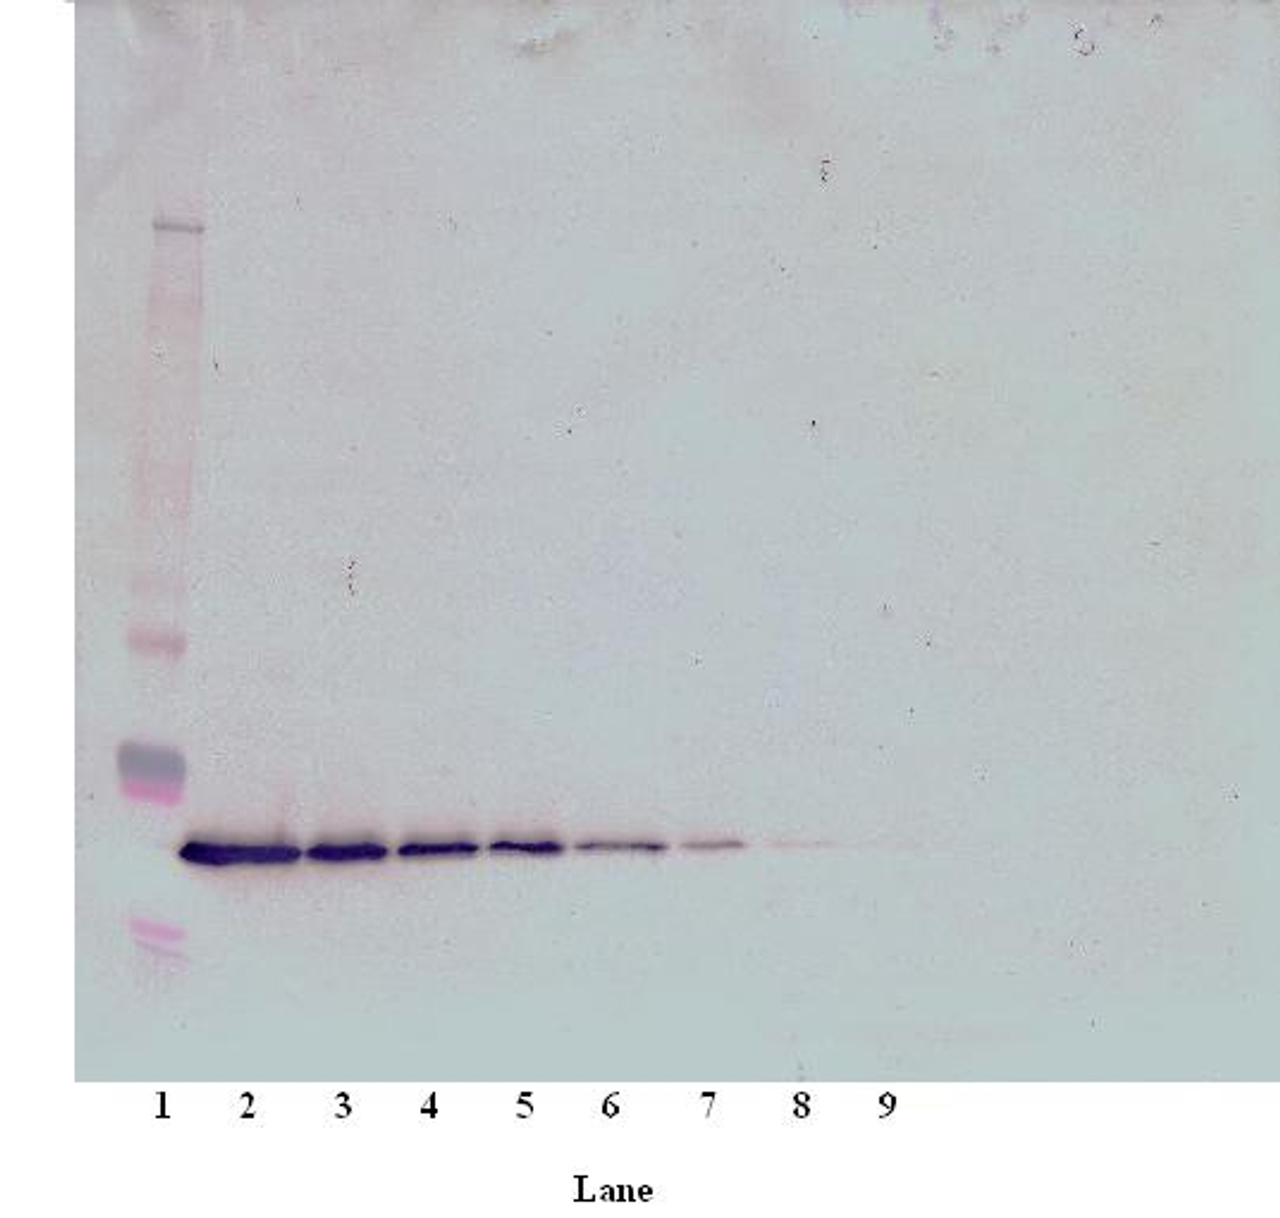 To detect hTPO by Western Blot analysis this antibody can be used at a concentration of 0.1-0.2 ug/ml. Used in conjunction with compatible secondary reagents the detection limit for recombinant hTPO is 1.5-3.0 ng/lane, under either reducing or non-reducing conditions.